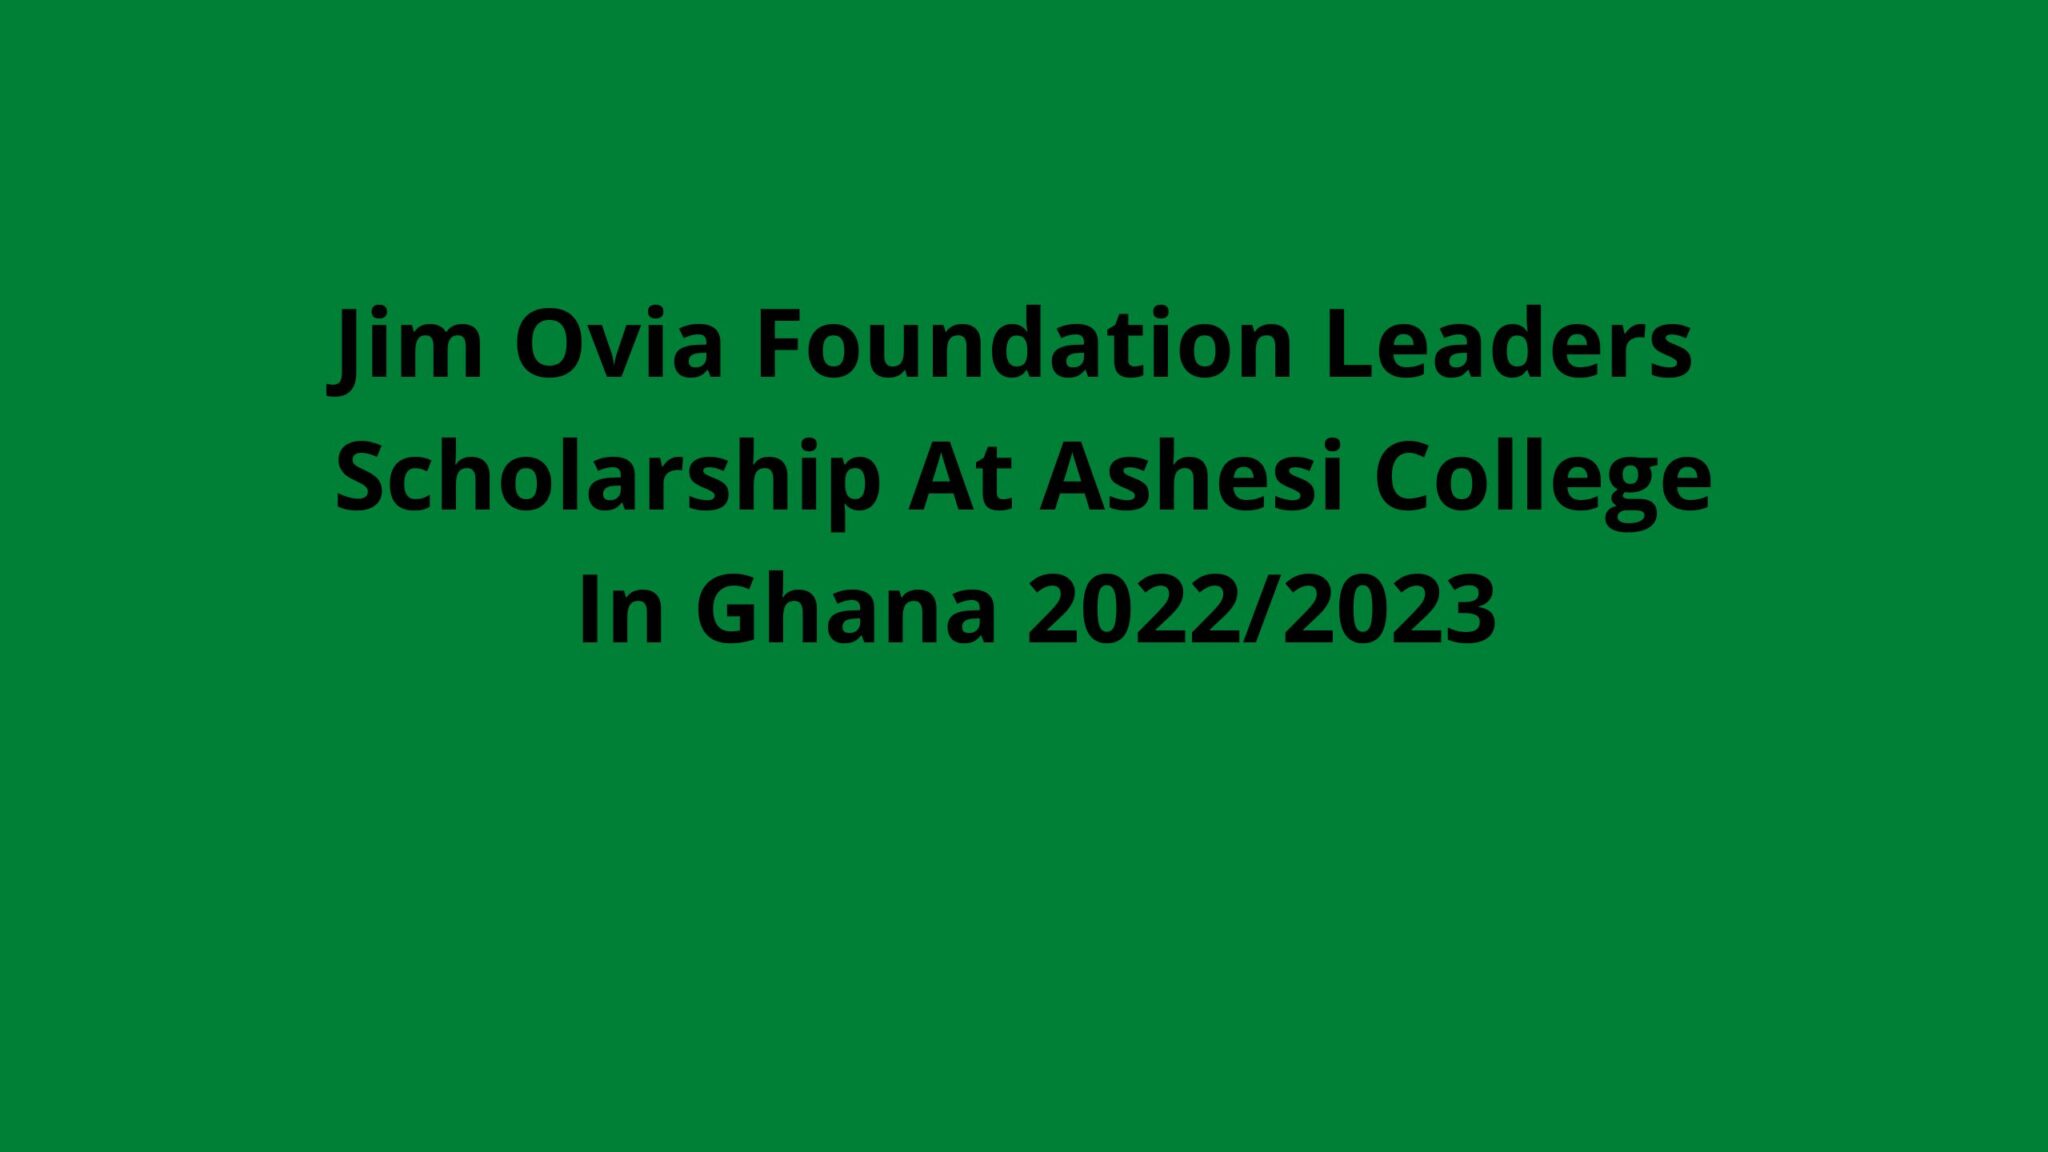 Jim Ovia Foundation Leaders Scholarship At Ashesi College In Ghana 20222023